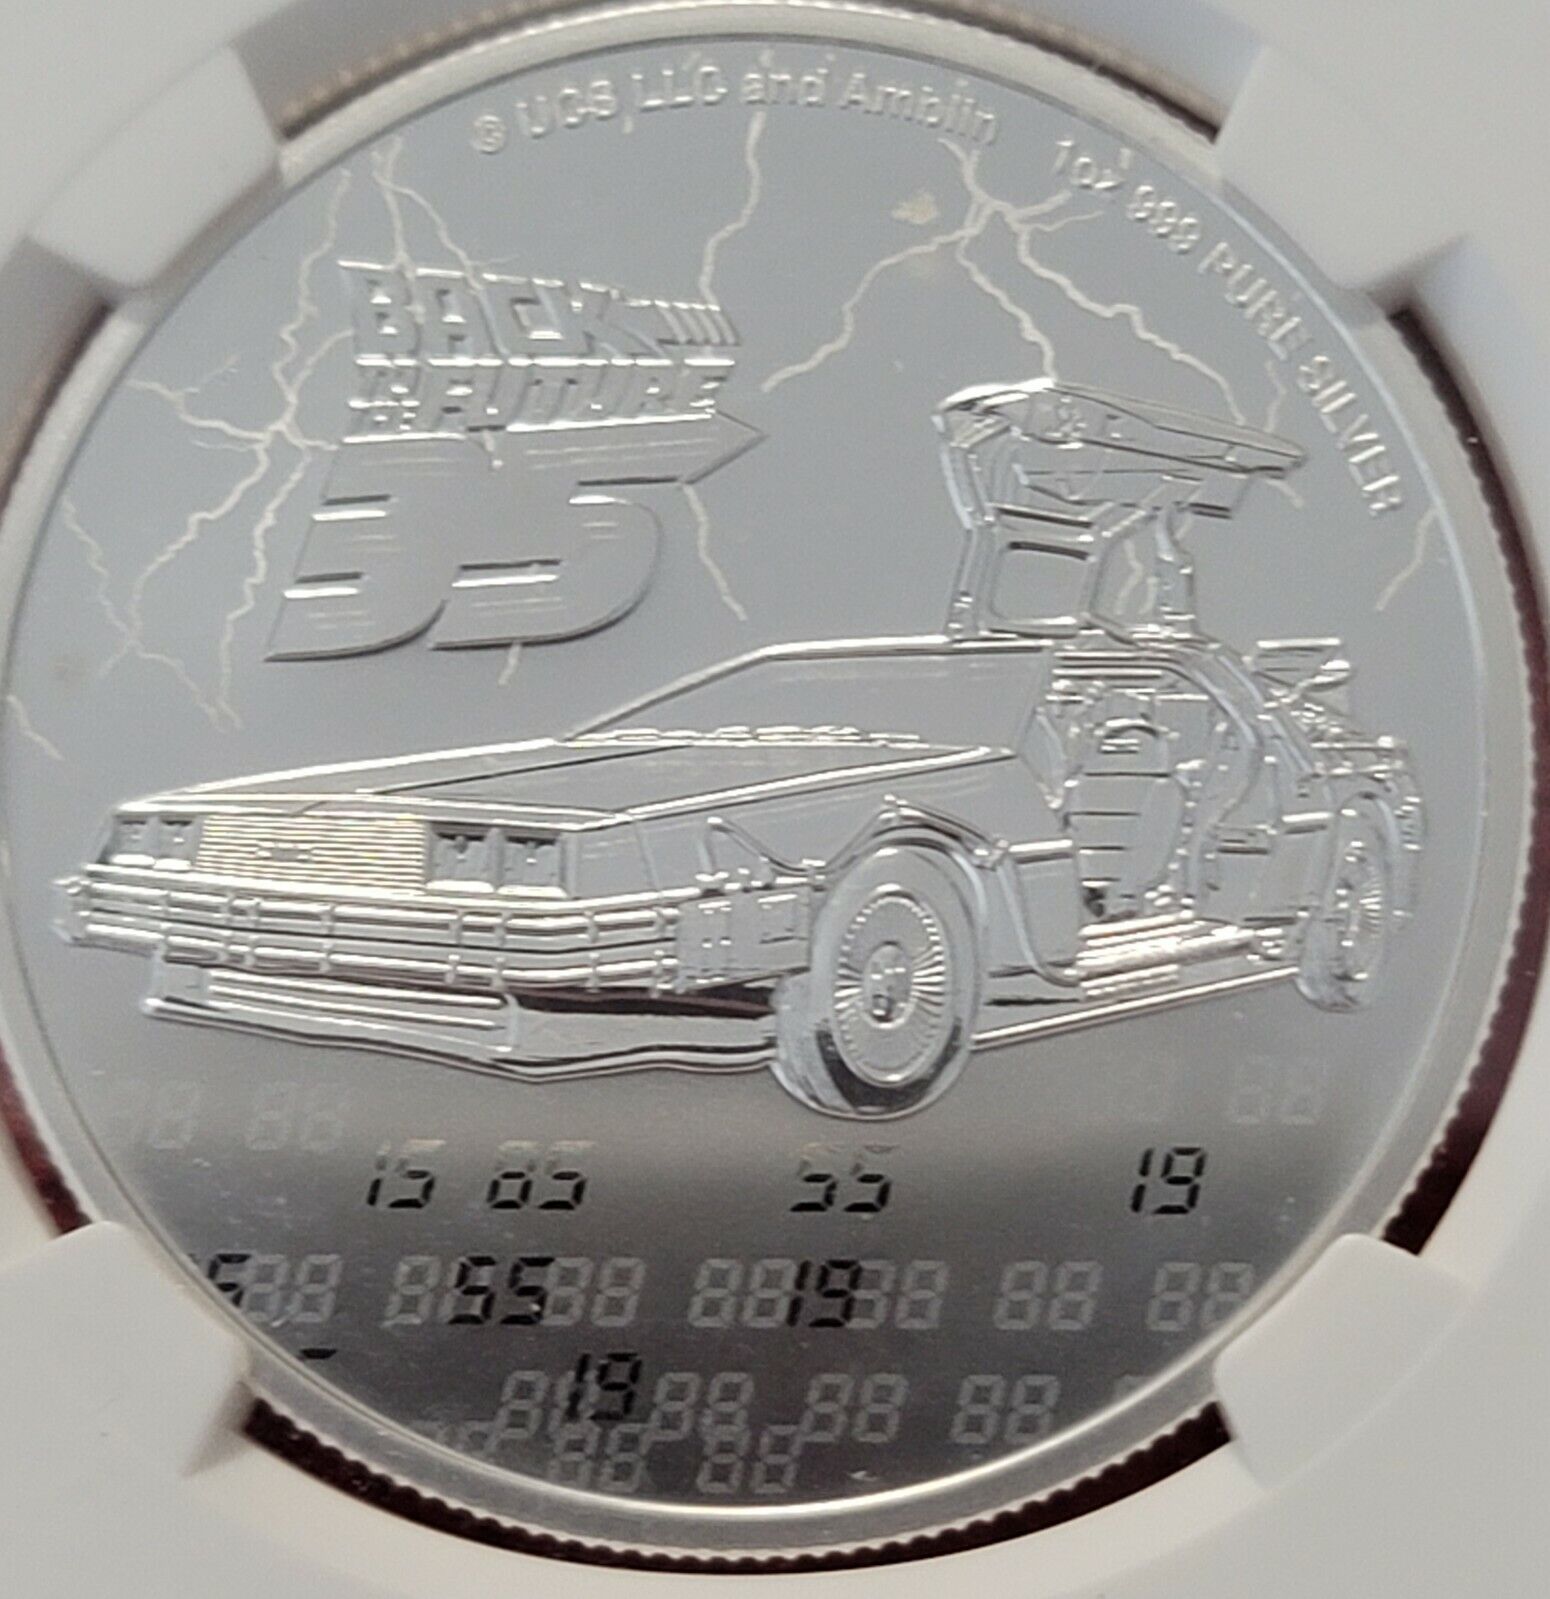 2020 NIUE S$2 BACK TO THE FUTURE, 35TH ANNIVERSARY, NGC MS 69 I 0Z SILVER COIN